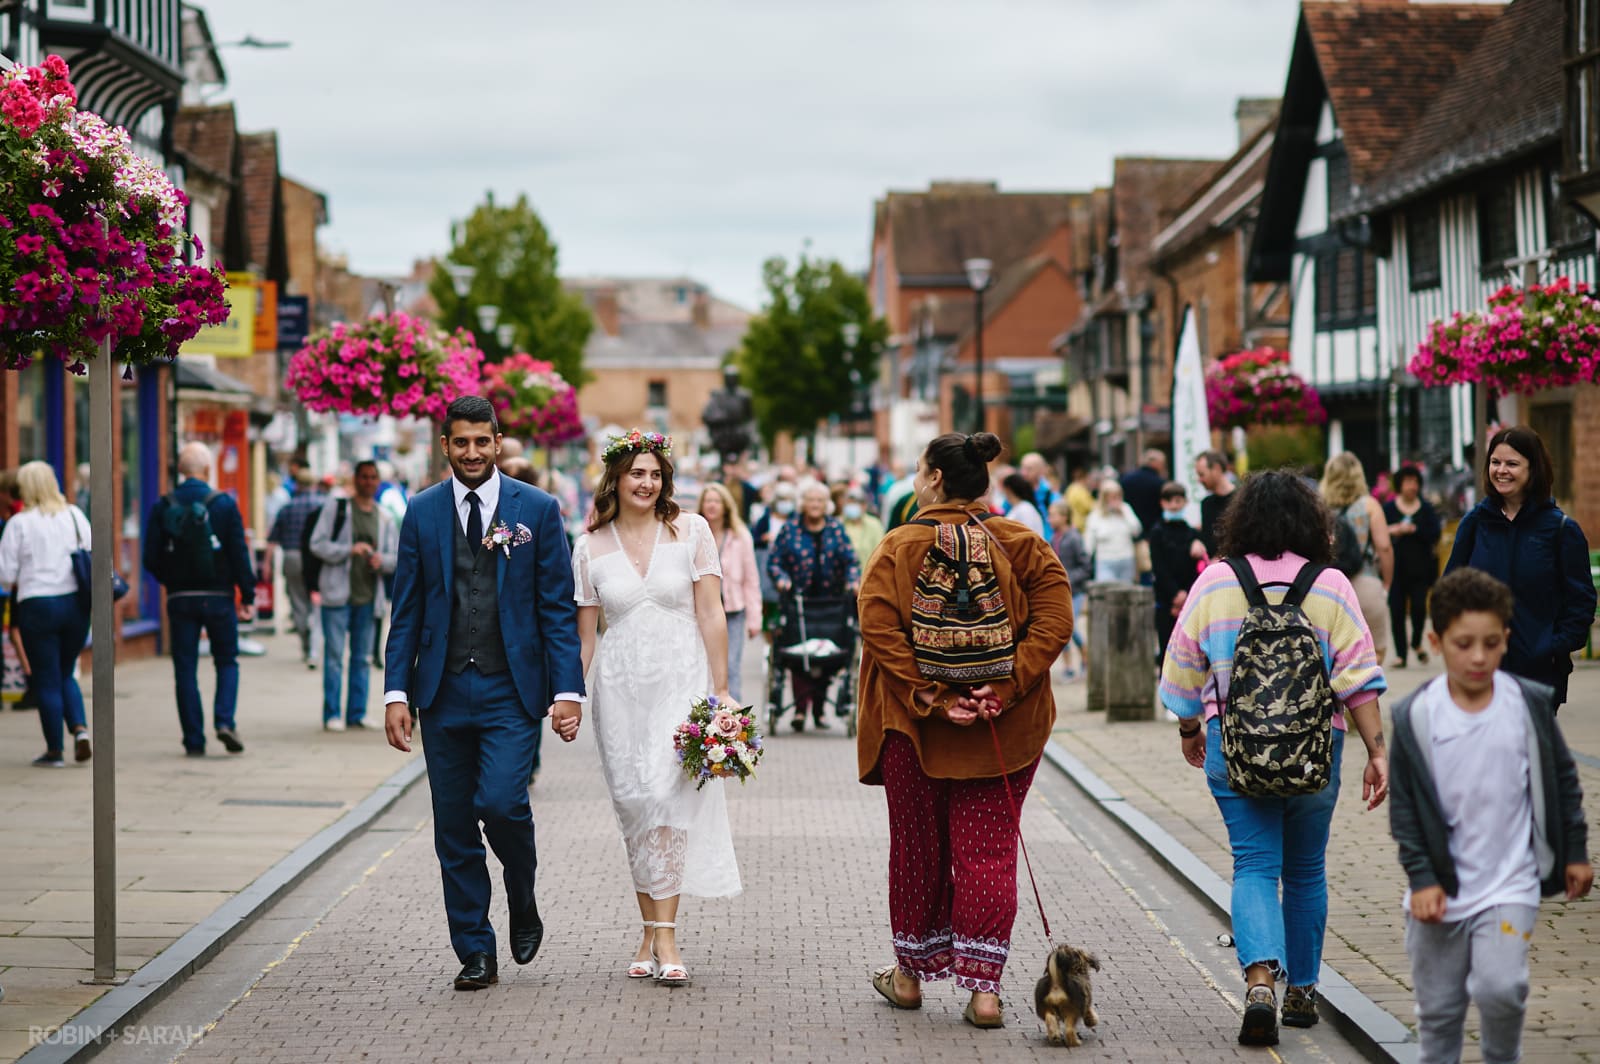 Bride and groom walk hand in hand through busy streets